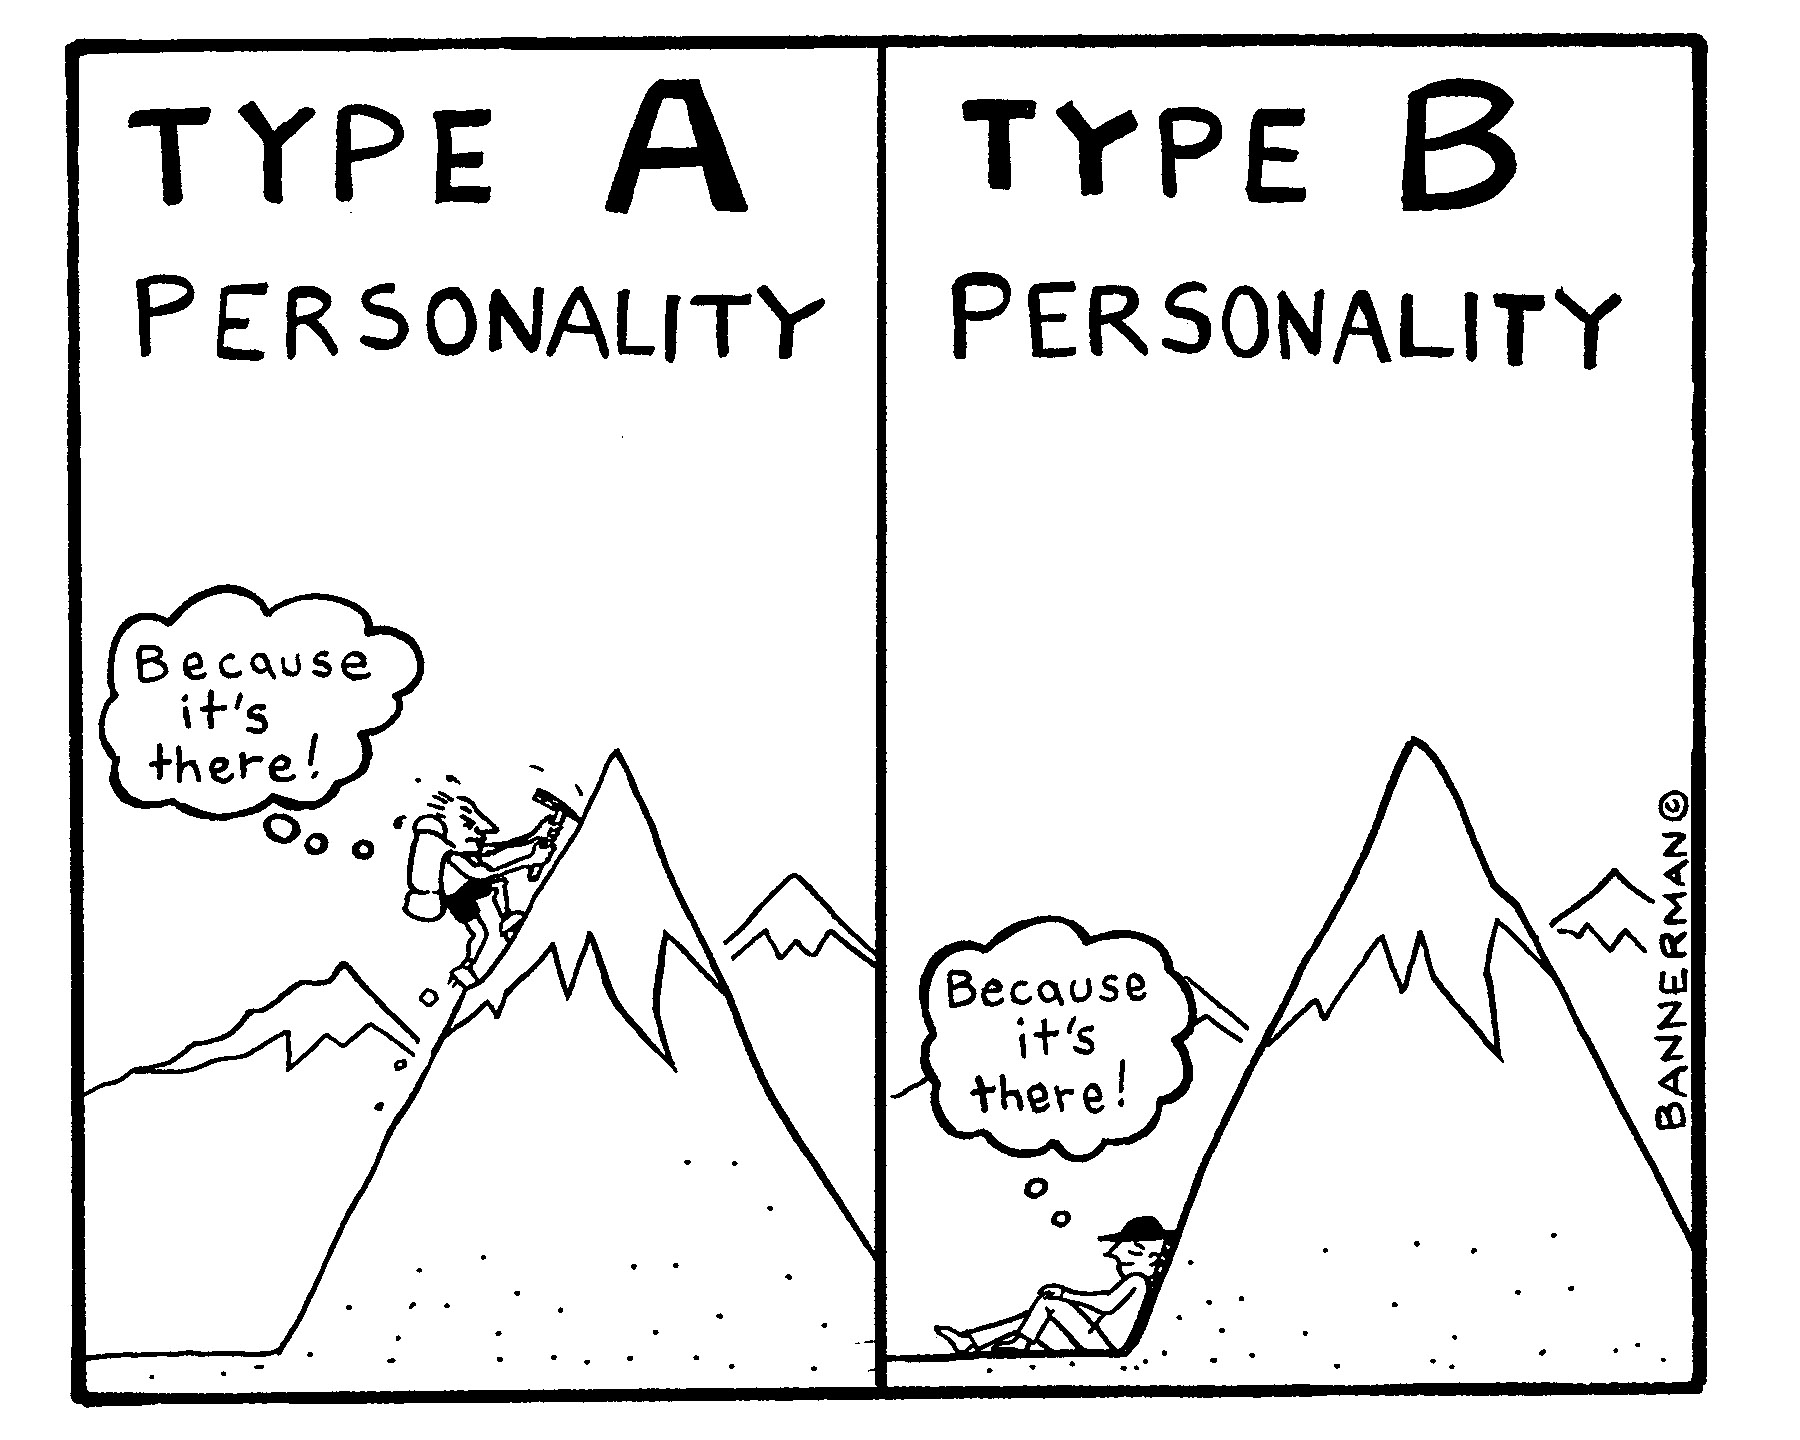 Type A personality